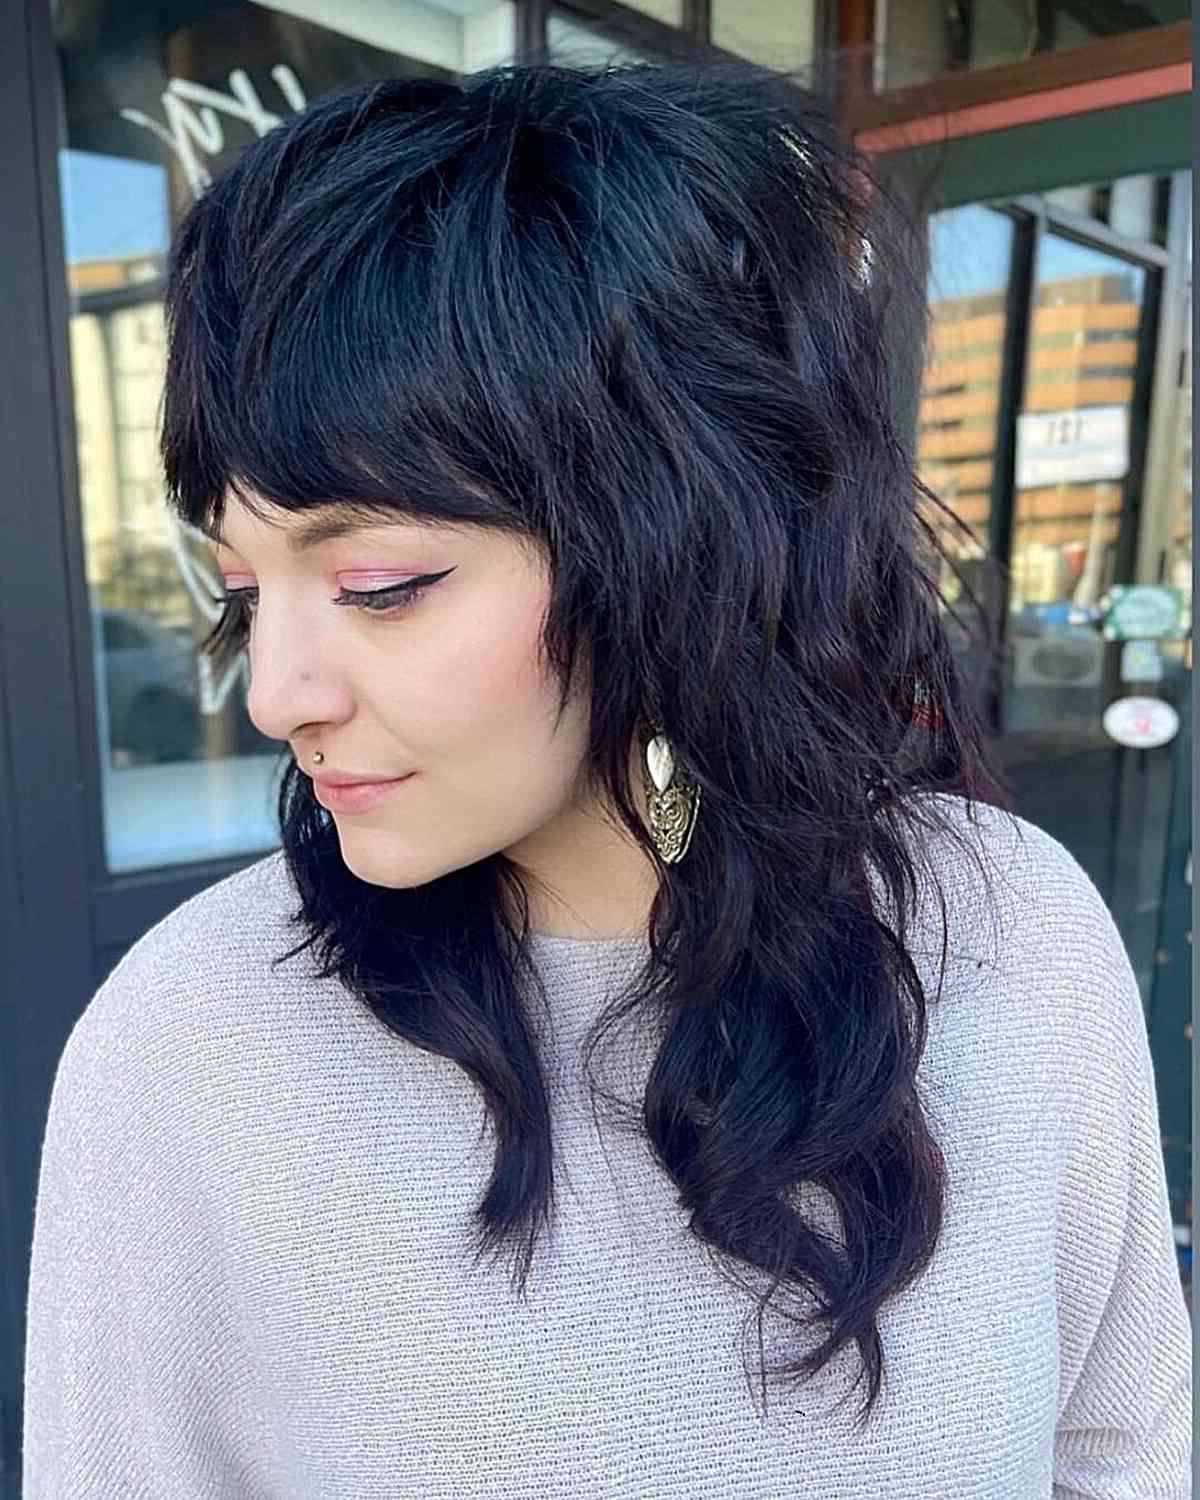 90 Chic Medium Shag Haircuts With Bangs For An On Trend Style Regarding Current Medium Shaggy Black Hair With Bangs (View 3 of 18)